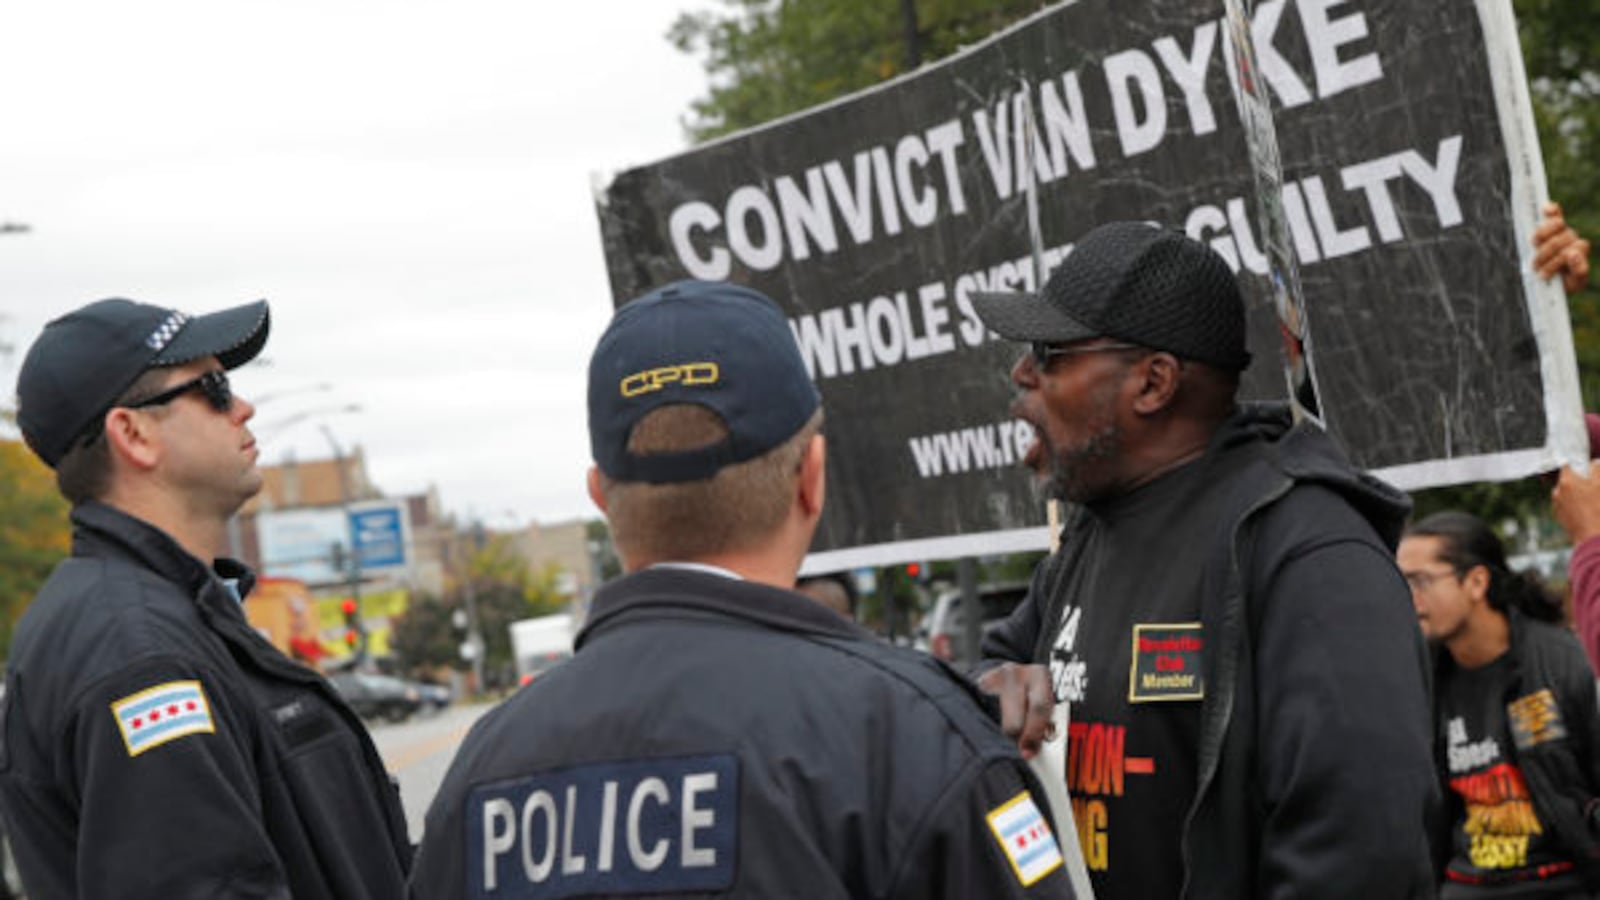 Protesters calling for the conviction of Chicago police officer Jason Van Dyke demonstrate in front of a line of Chicago police officers outside the Leighton Criminal Court Building in Chicago, October 4, 2018. - Van Dyke is charged with killing 17-year-old Laquan McDonald 16 times in an October 2014 confrontation.